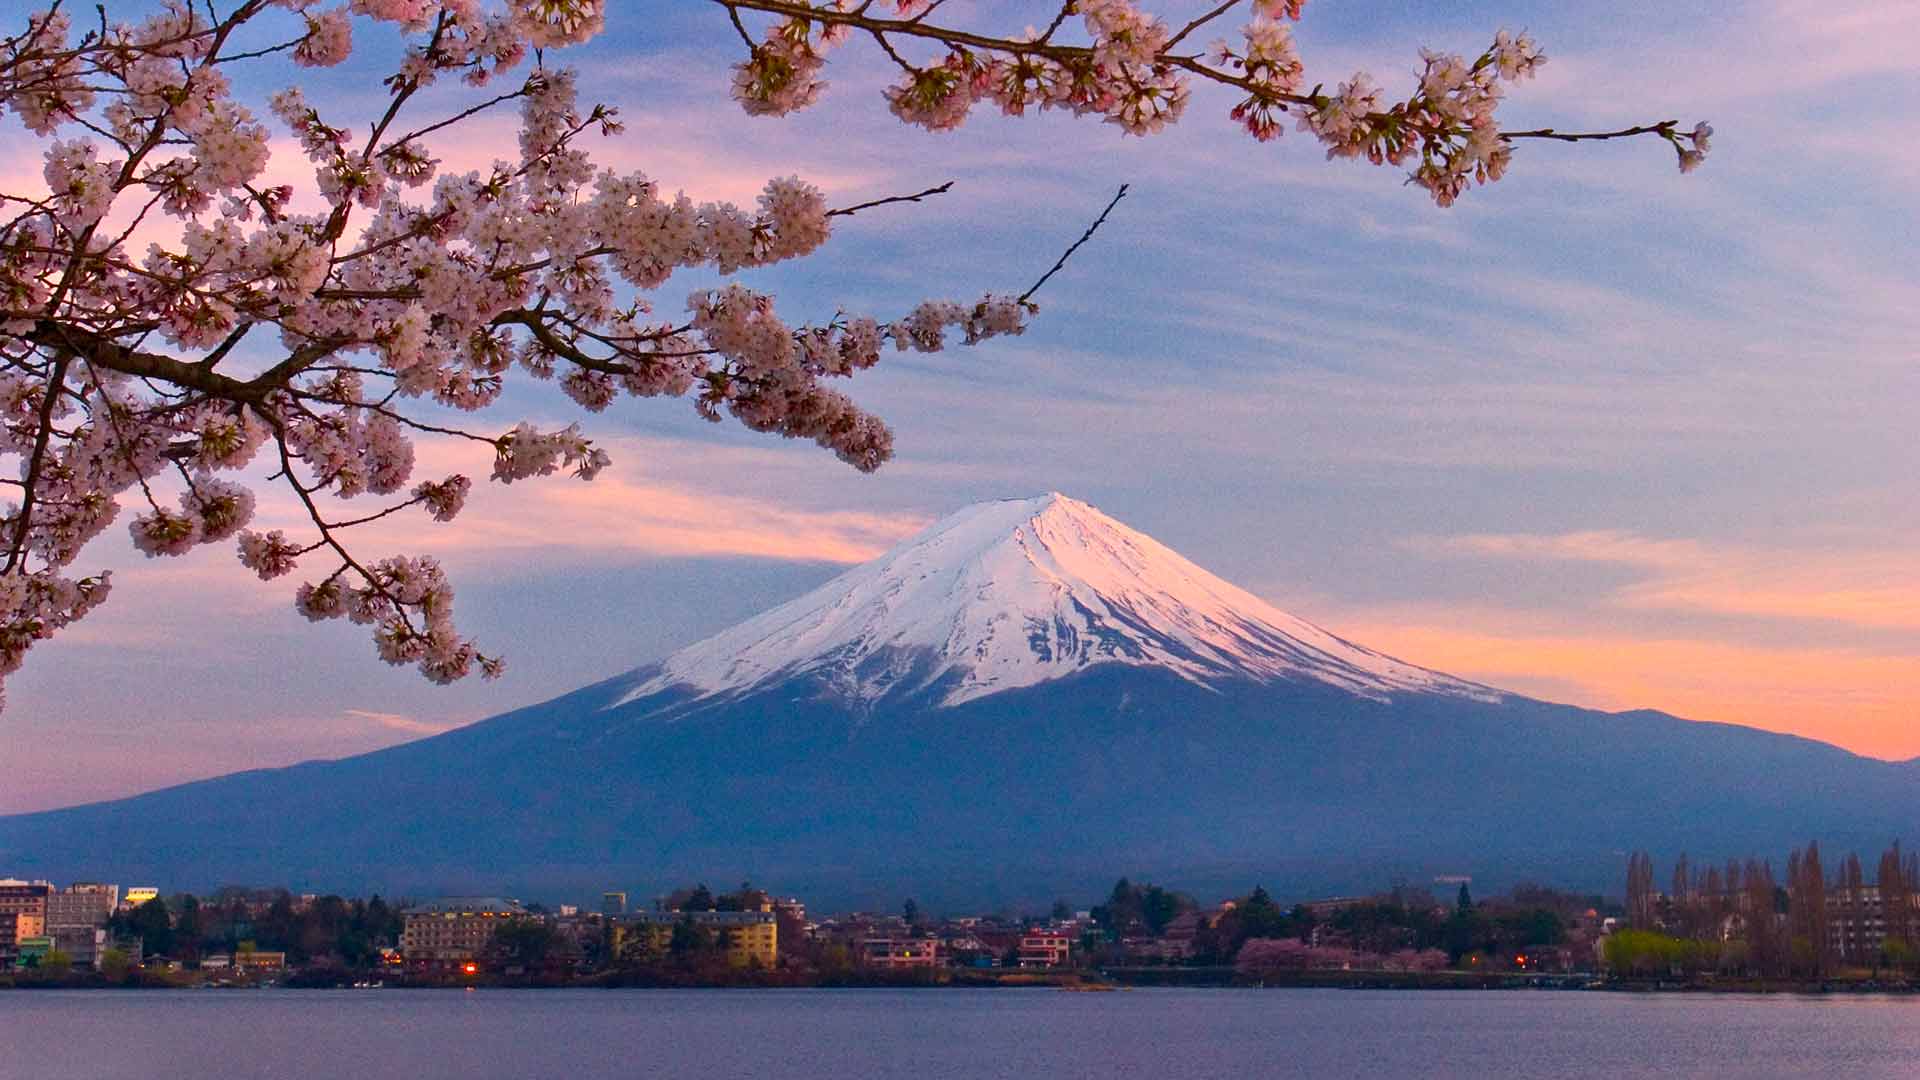 Japan Scenery Wallpapers - Top Free Japan Scenery Backgrounds